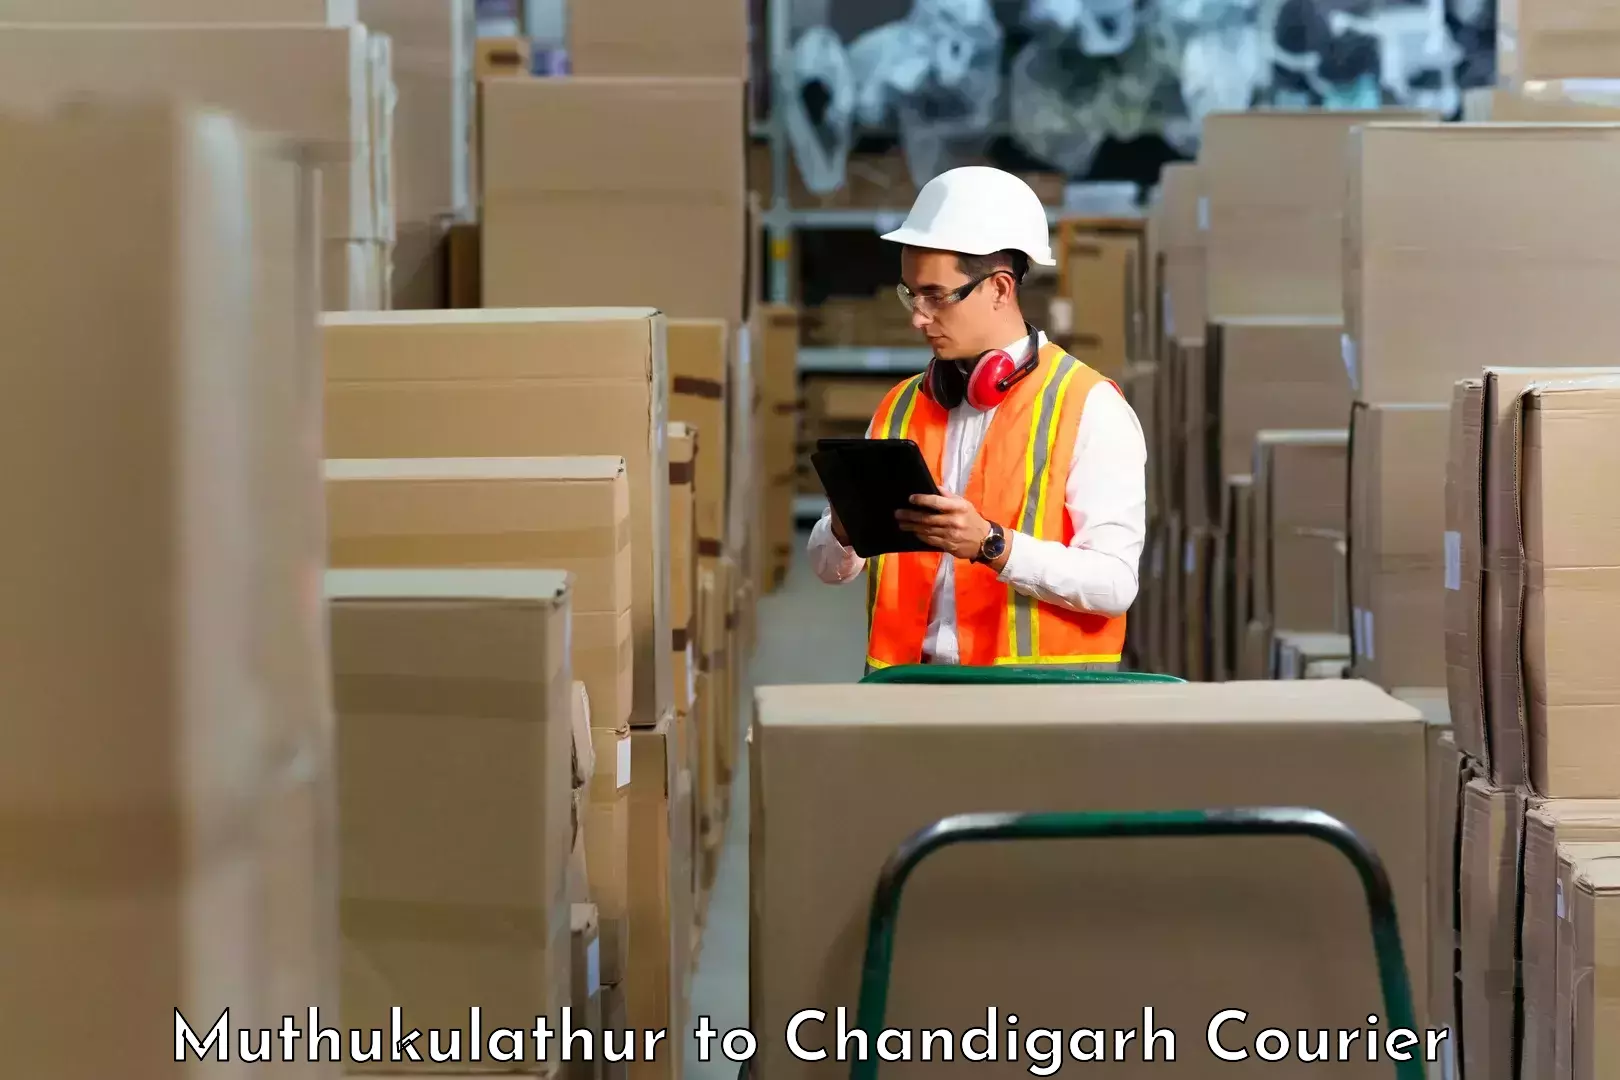 Parcel handling and care Muthukulathur to Chandigarh